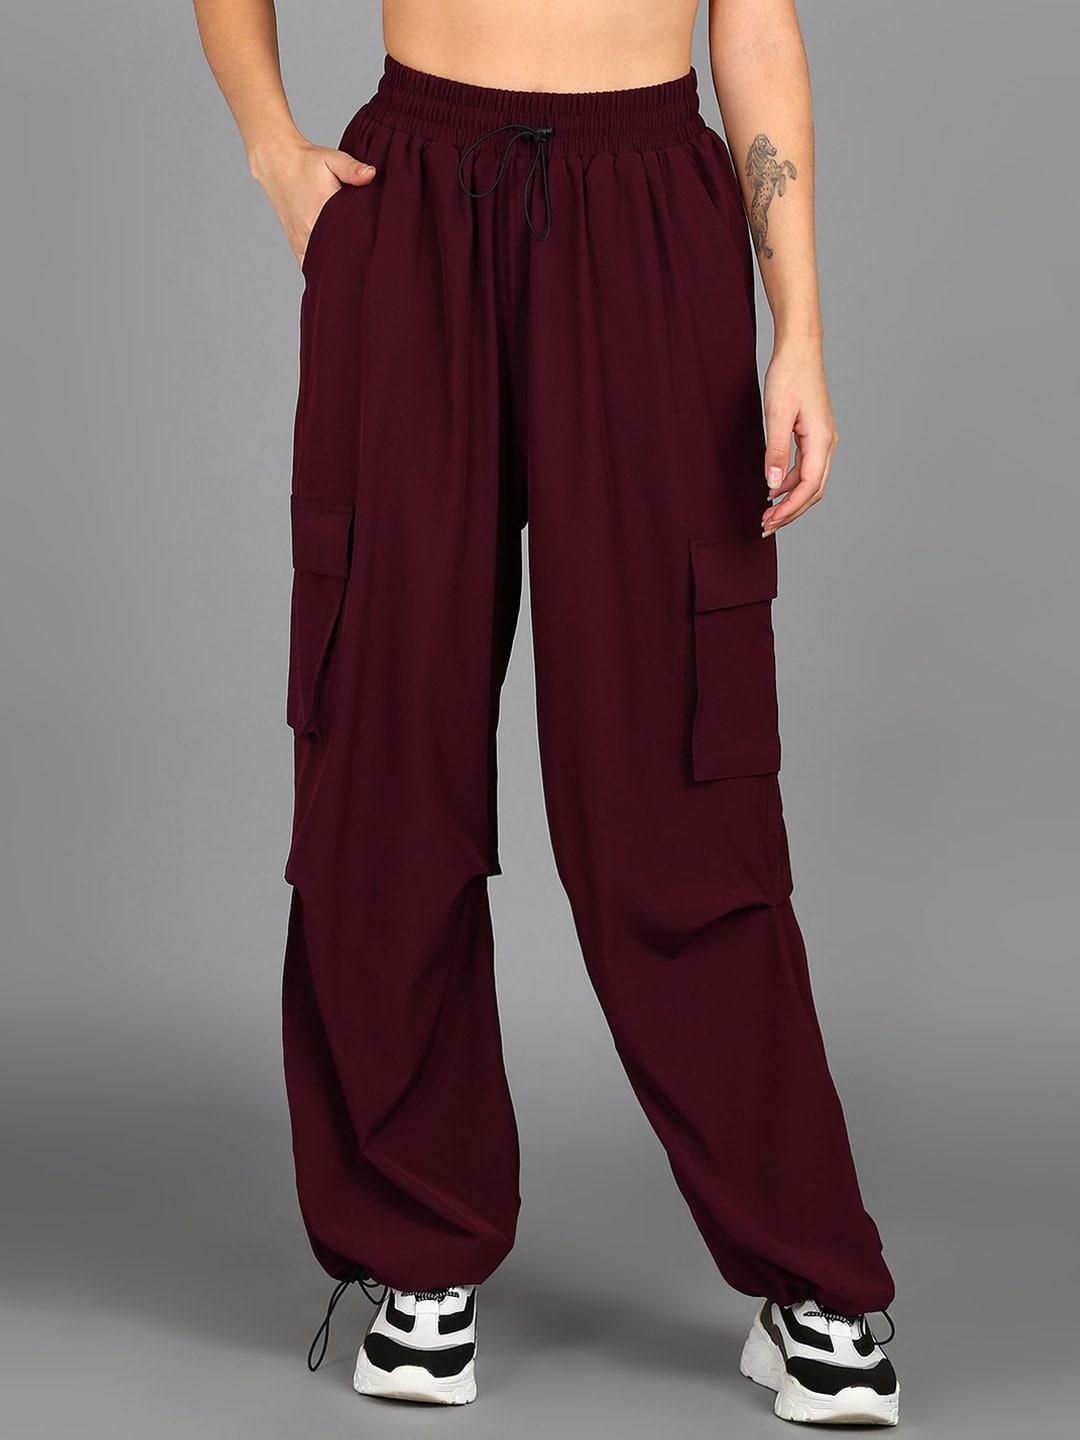 The Roadster Lifestyle Co. Women Maroon Baggy Fit Parachute Rapid-Dry Track Pants